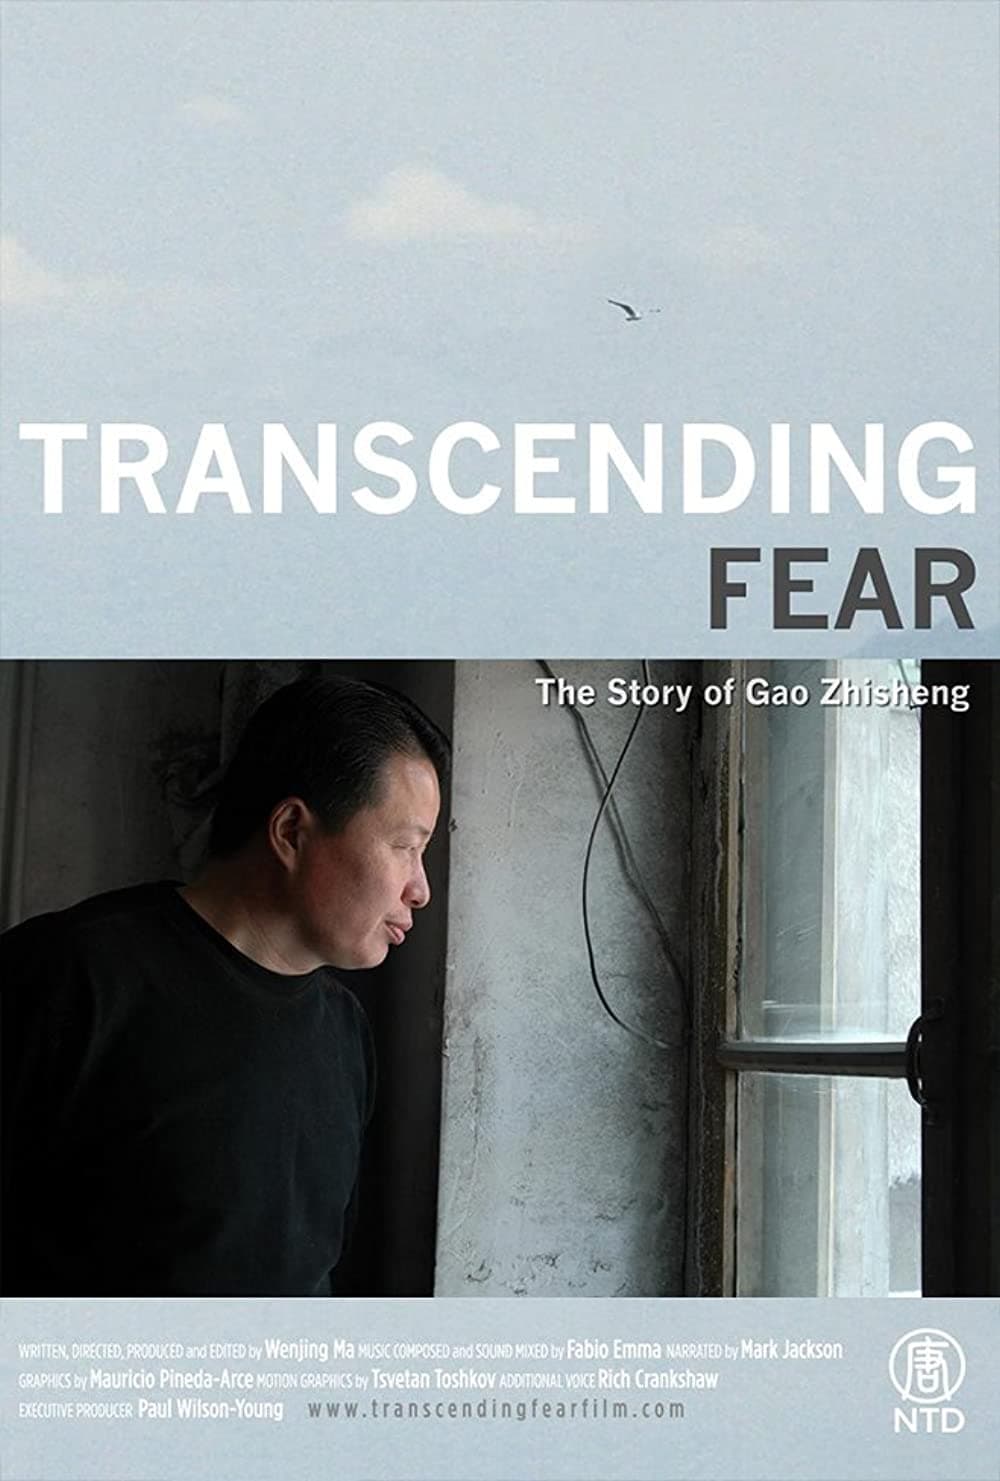 Transcending Fear: The Story of Gao Zhisheng